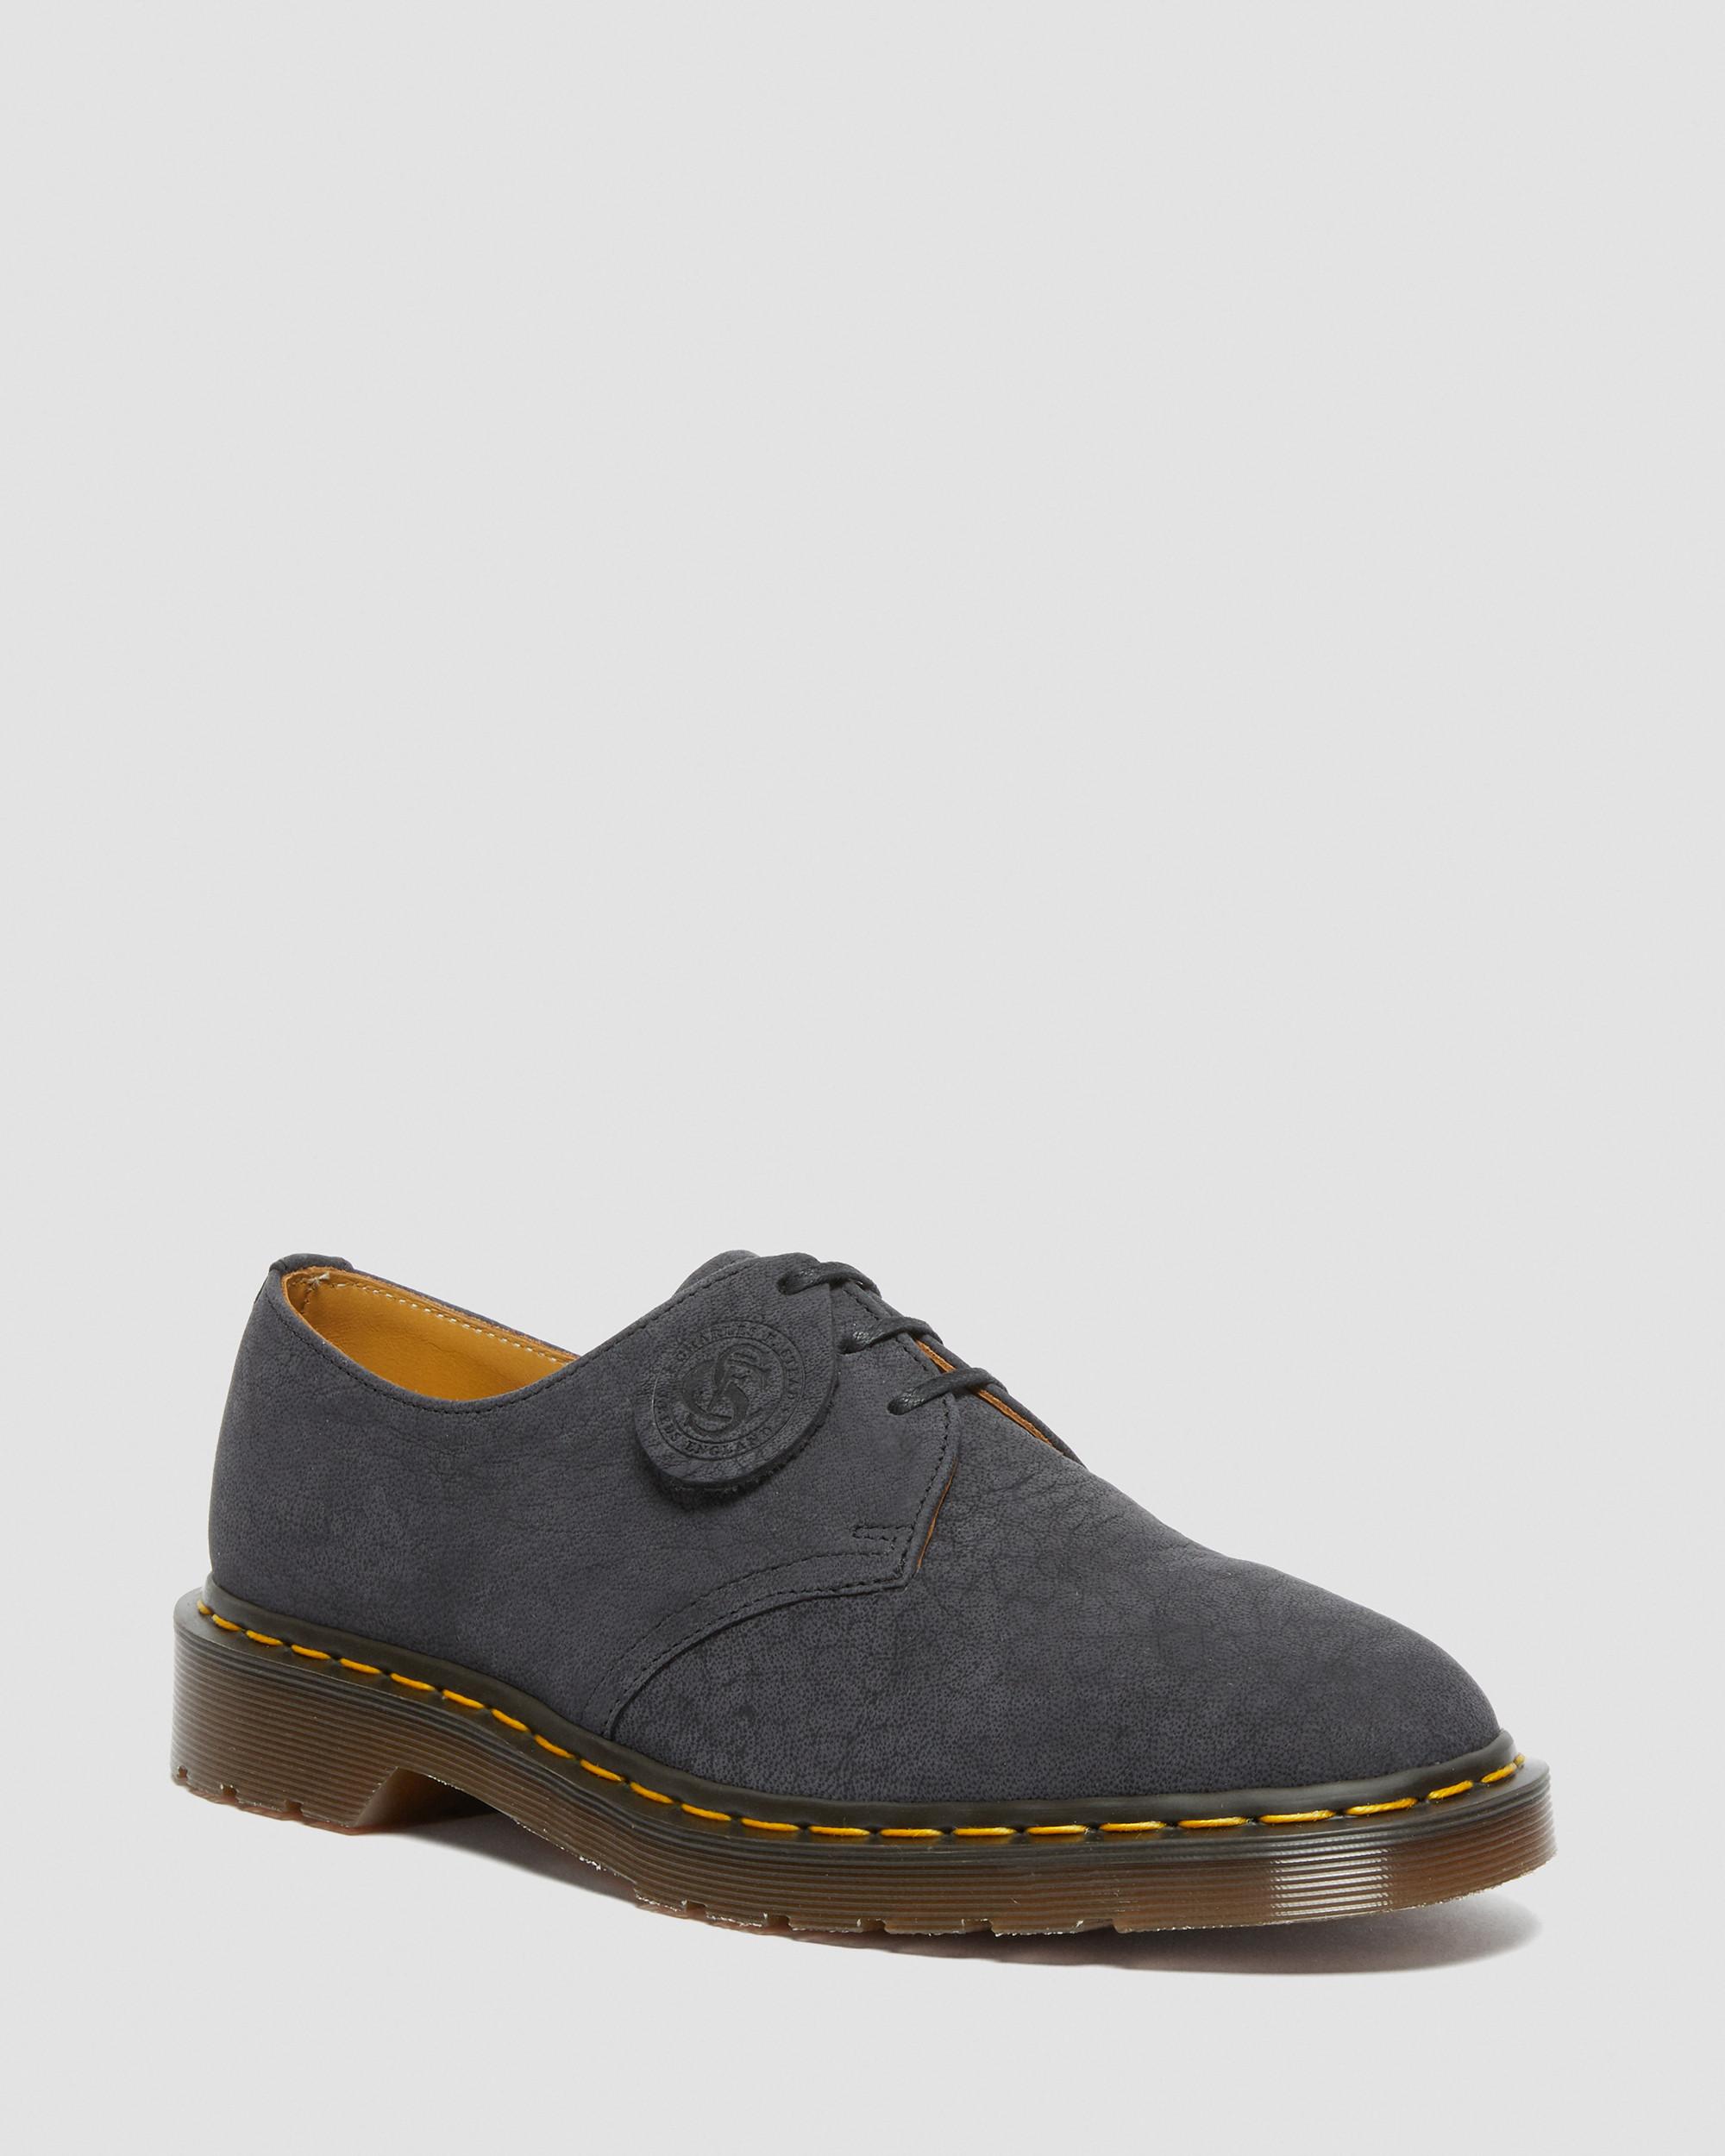 1461 Made in England Nubuck Leather Oxford Shoes, Black | Dr. Martens